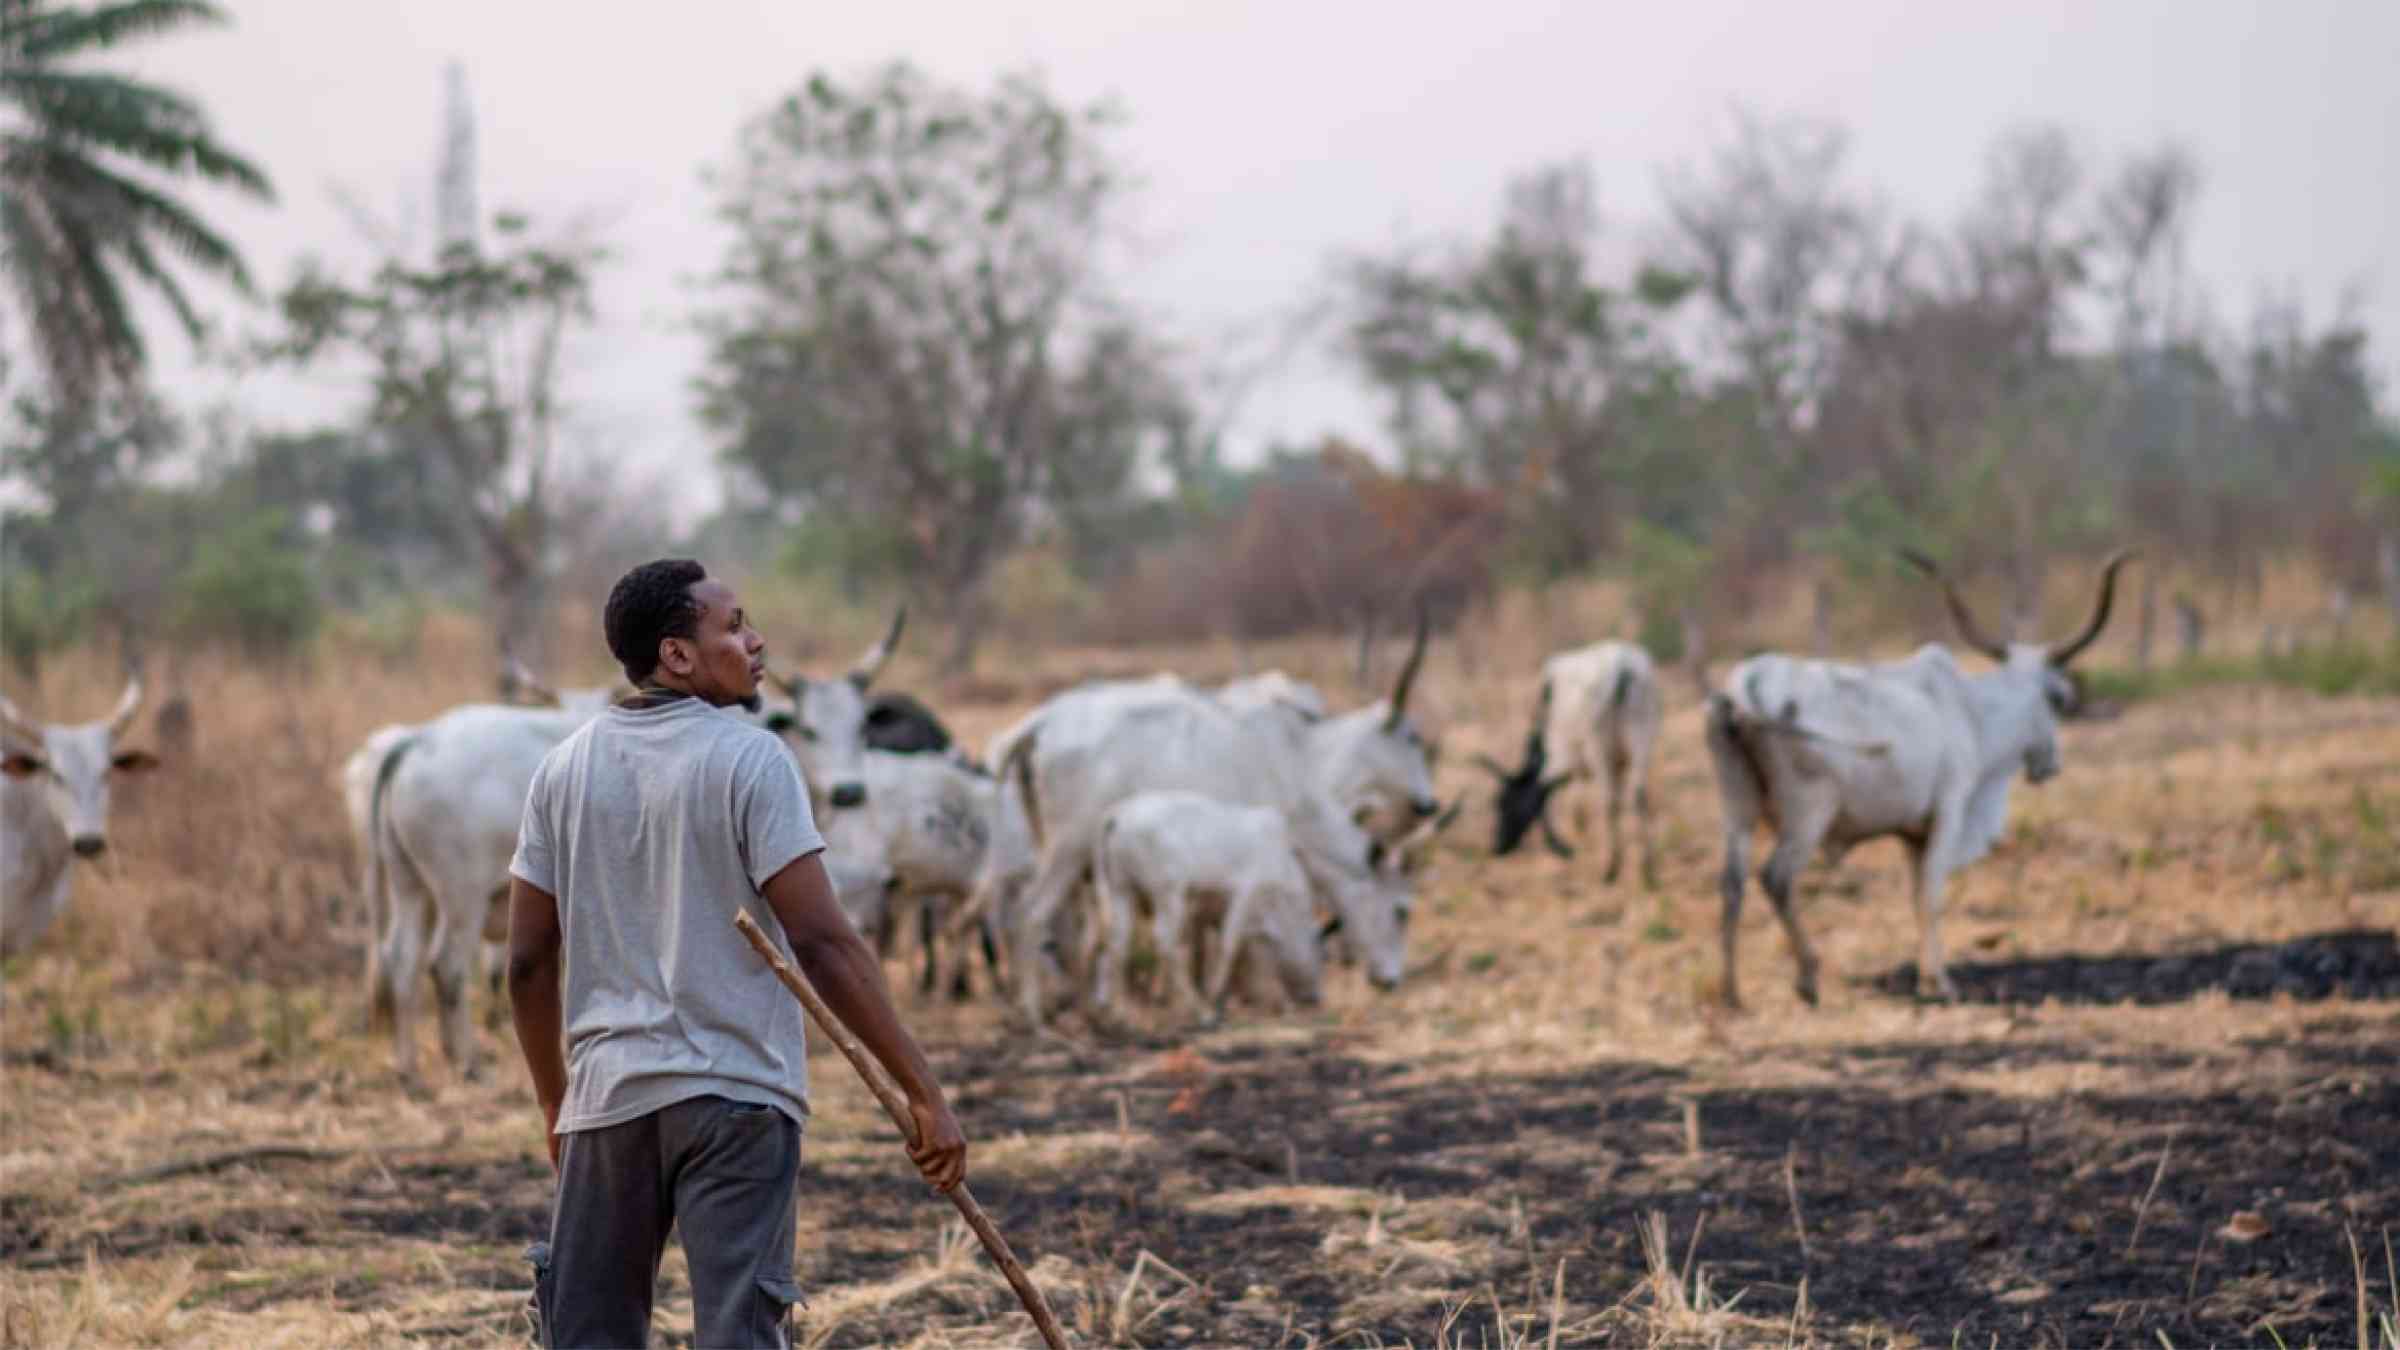 Nigerian pastoralist with cows in the background